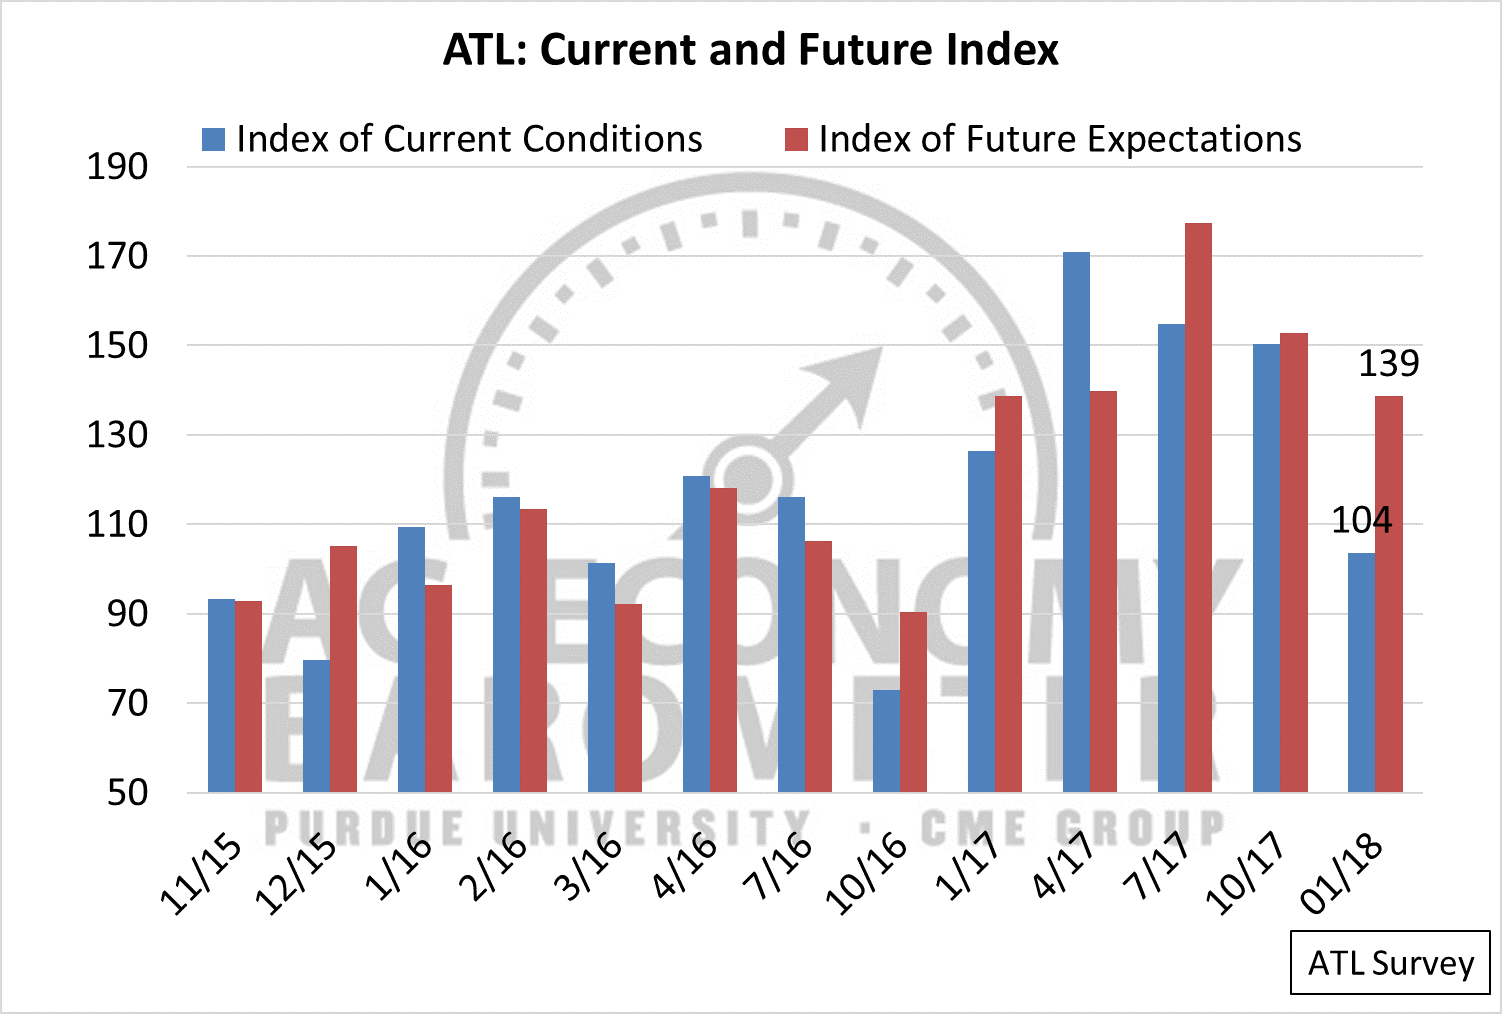 Figure 7. Ag Thought Leader Current Conditions and Future Expectations indices.